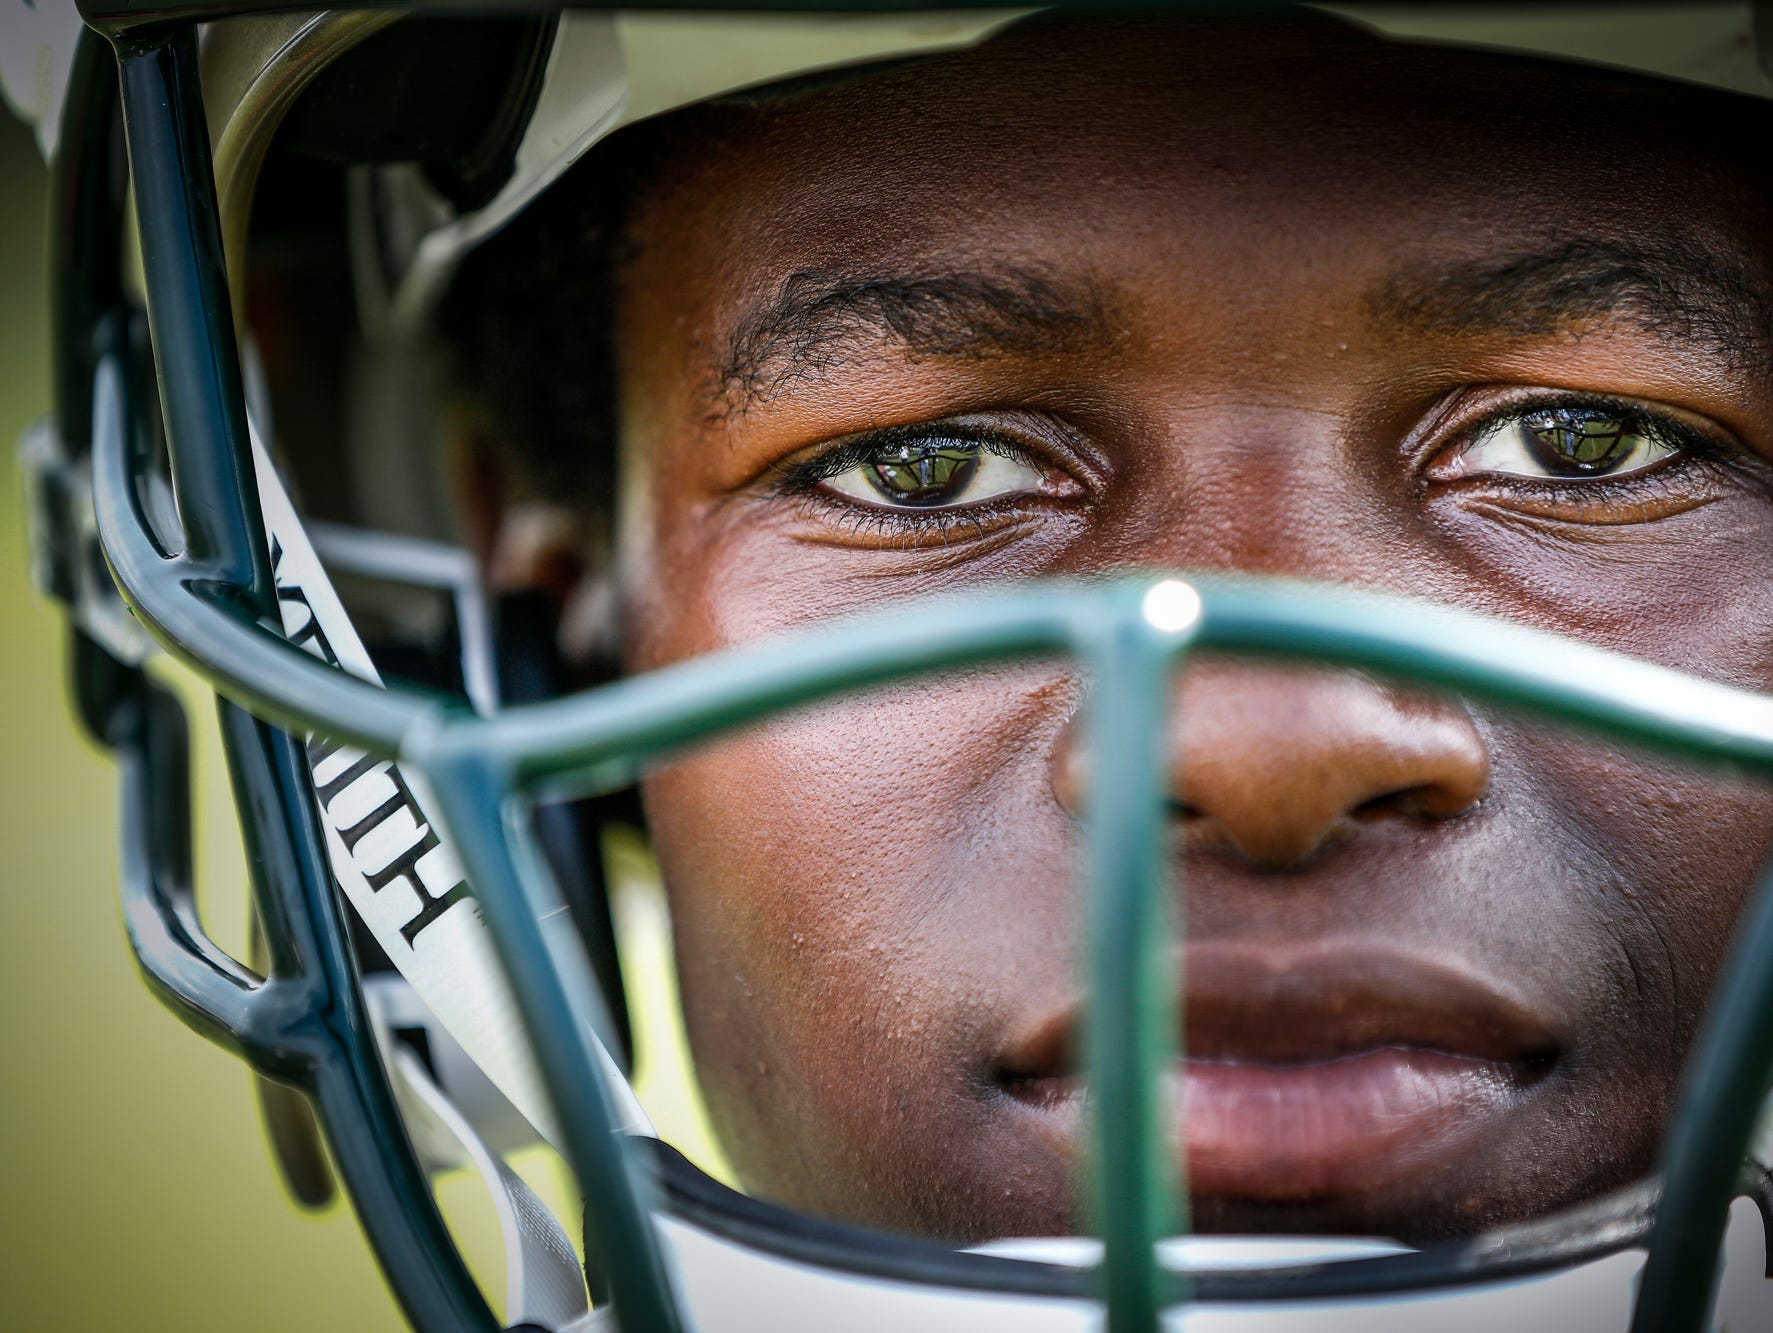 Crispus Attucks Tigers tailback and defensive back Eric Dotson poses for a portrait during practice at Alonzo Watford Athletic Field on Aug. 17, 2016.